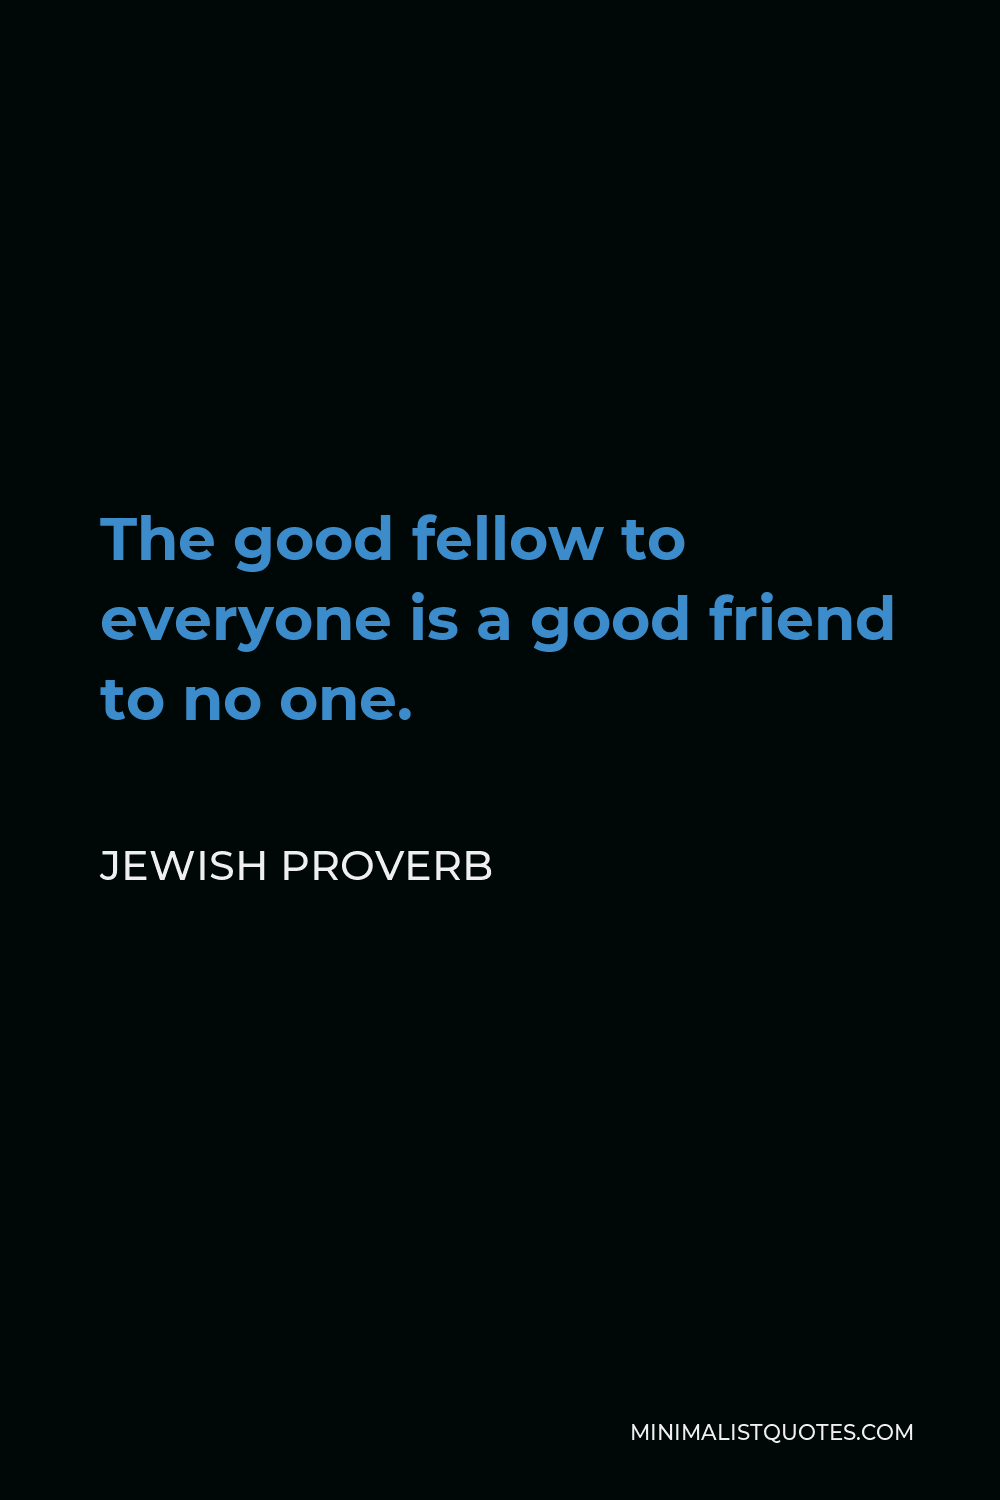 Jewish Proverb Quote - The good fellow to everyone is a good friend to no one.